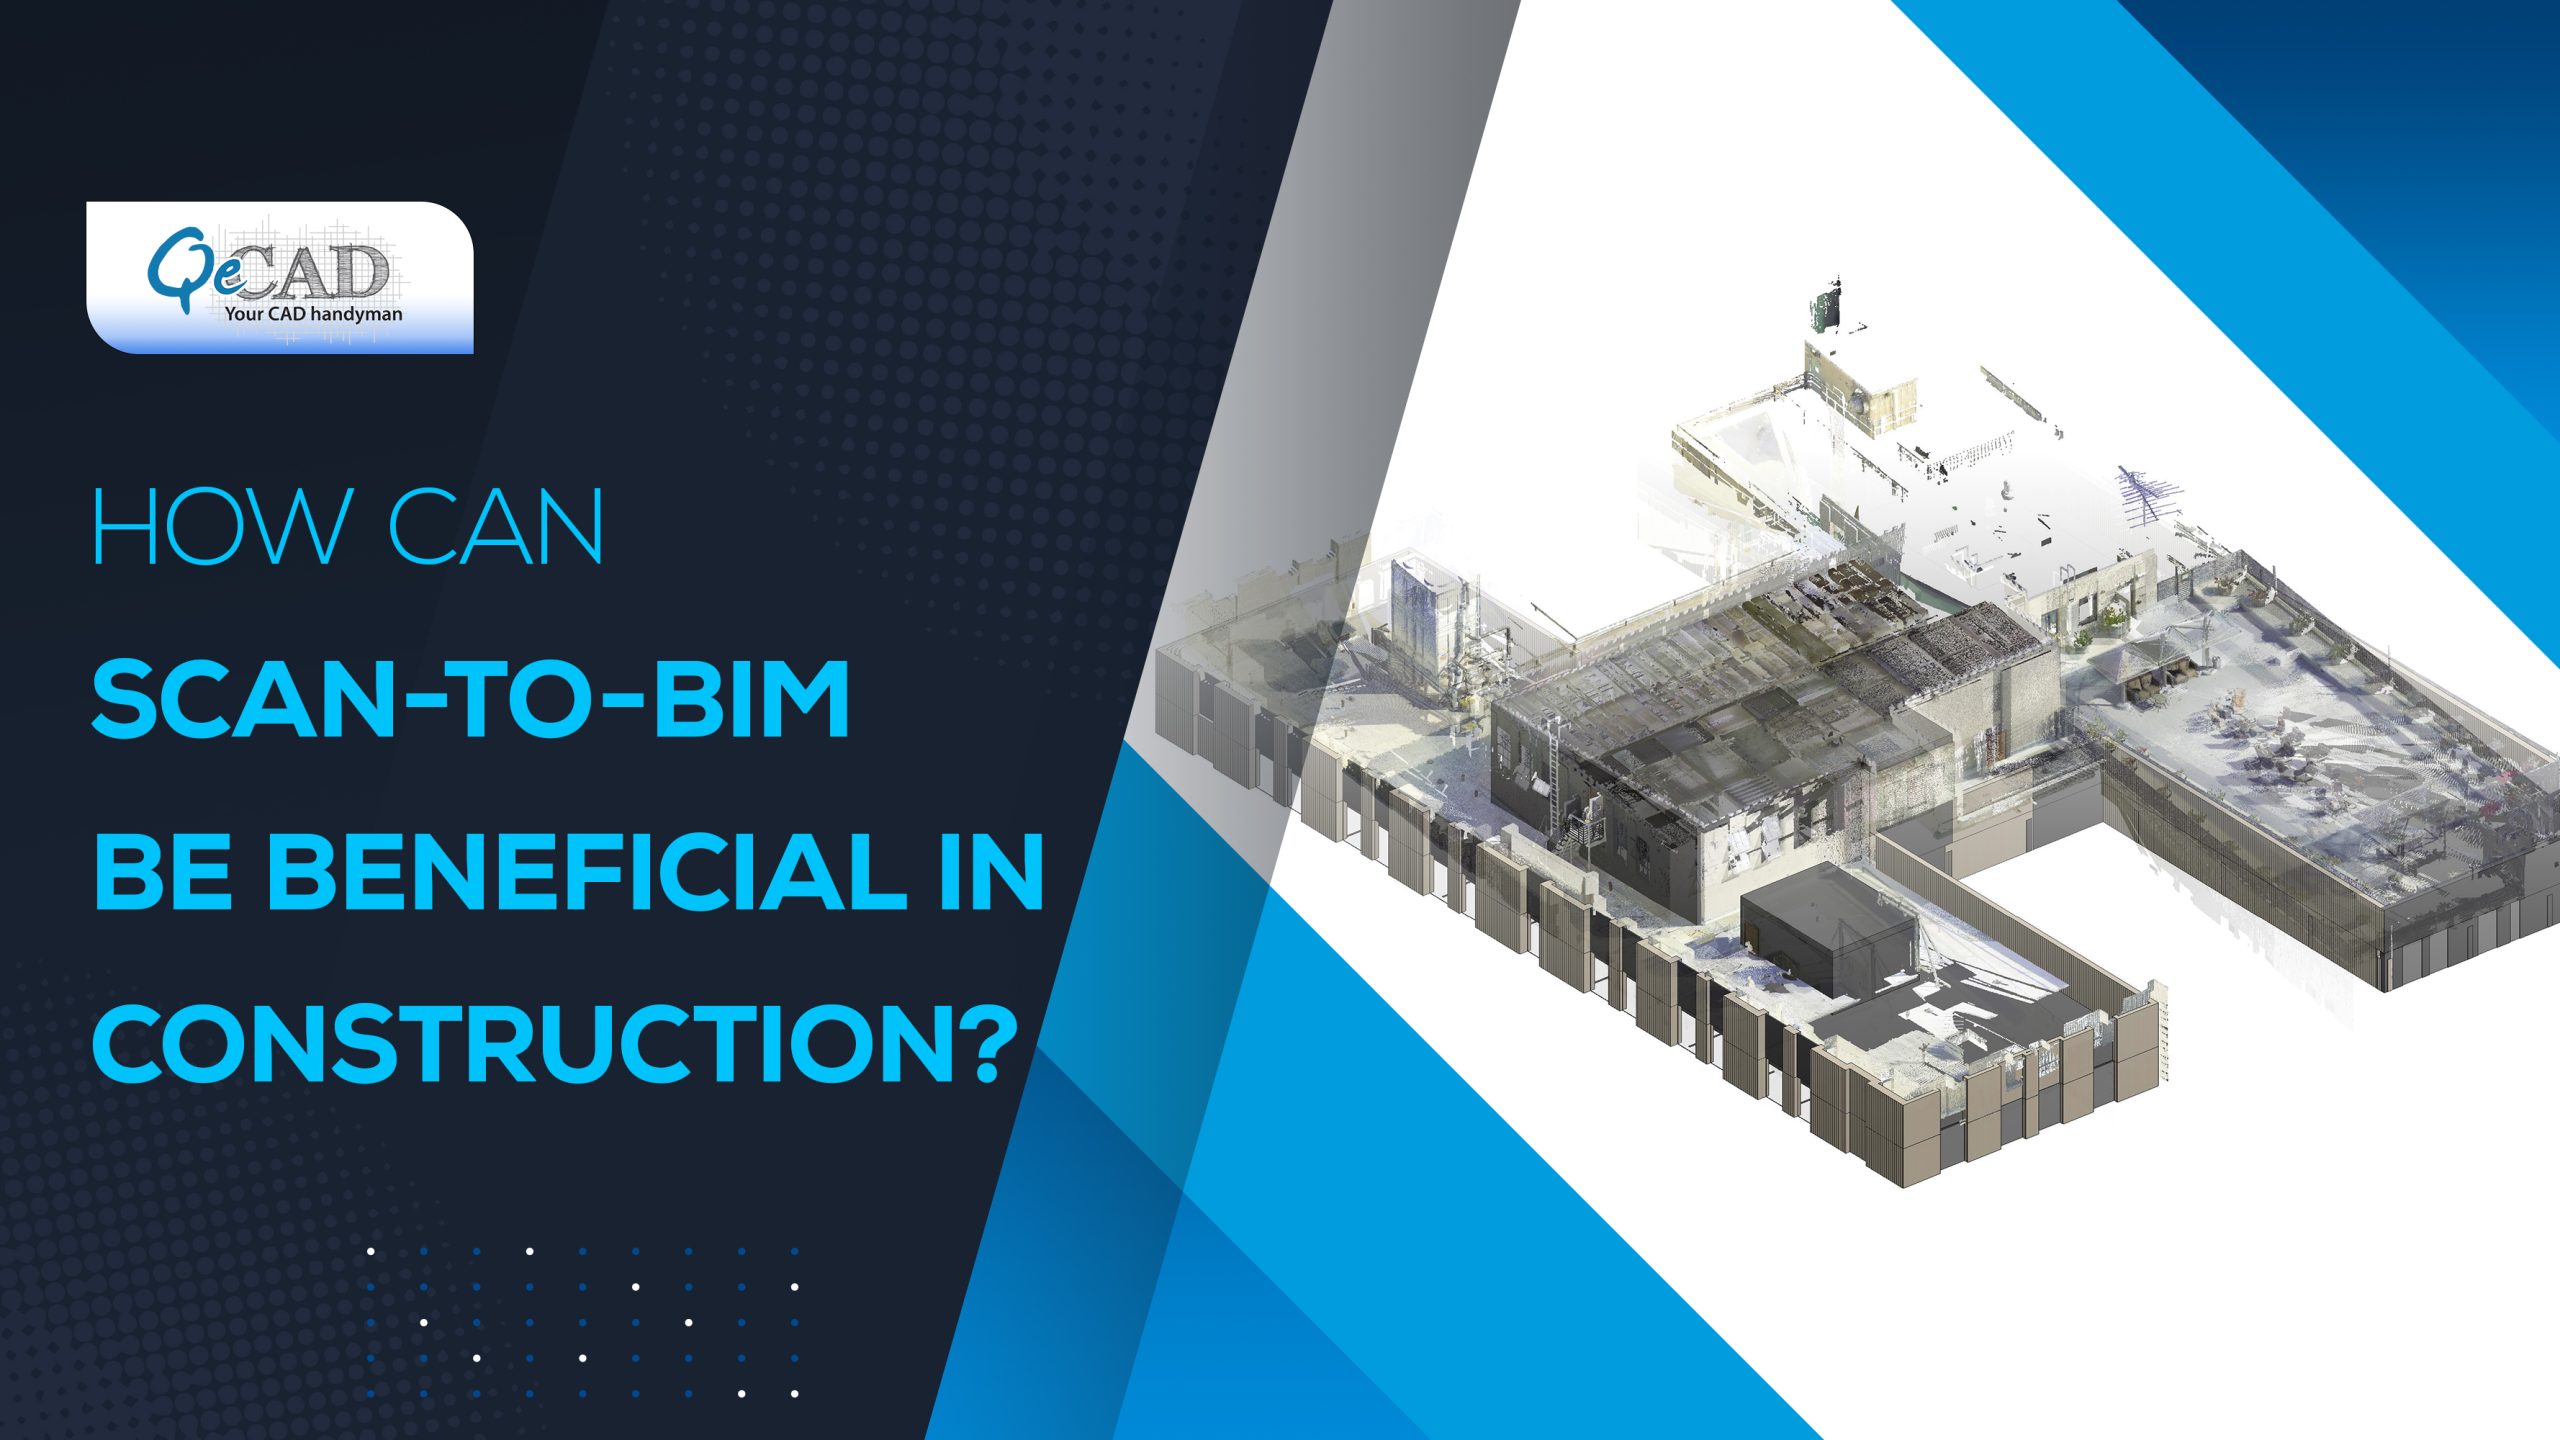 BIM increased clarity and project understanding throughout the